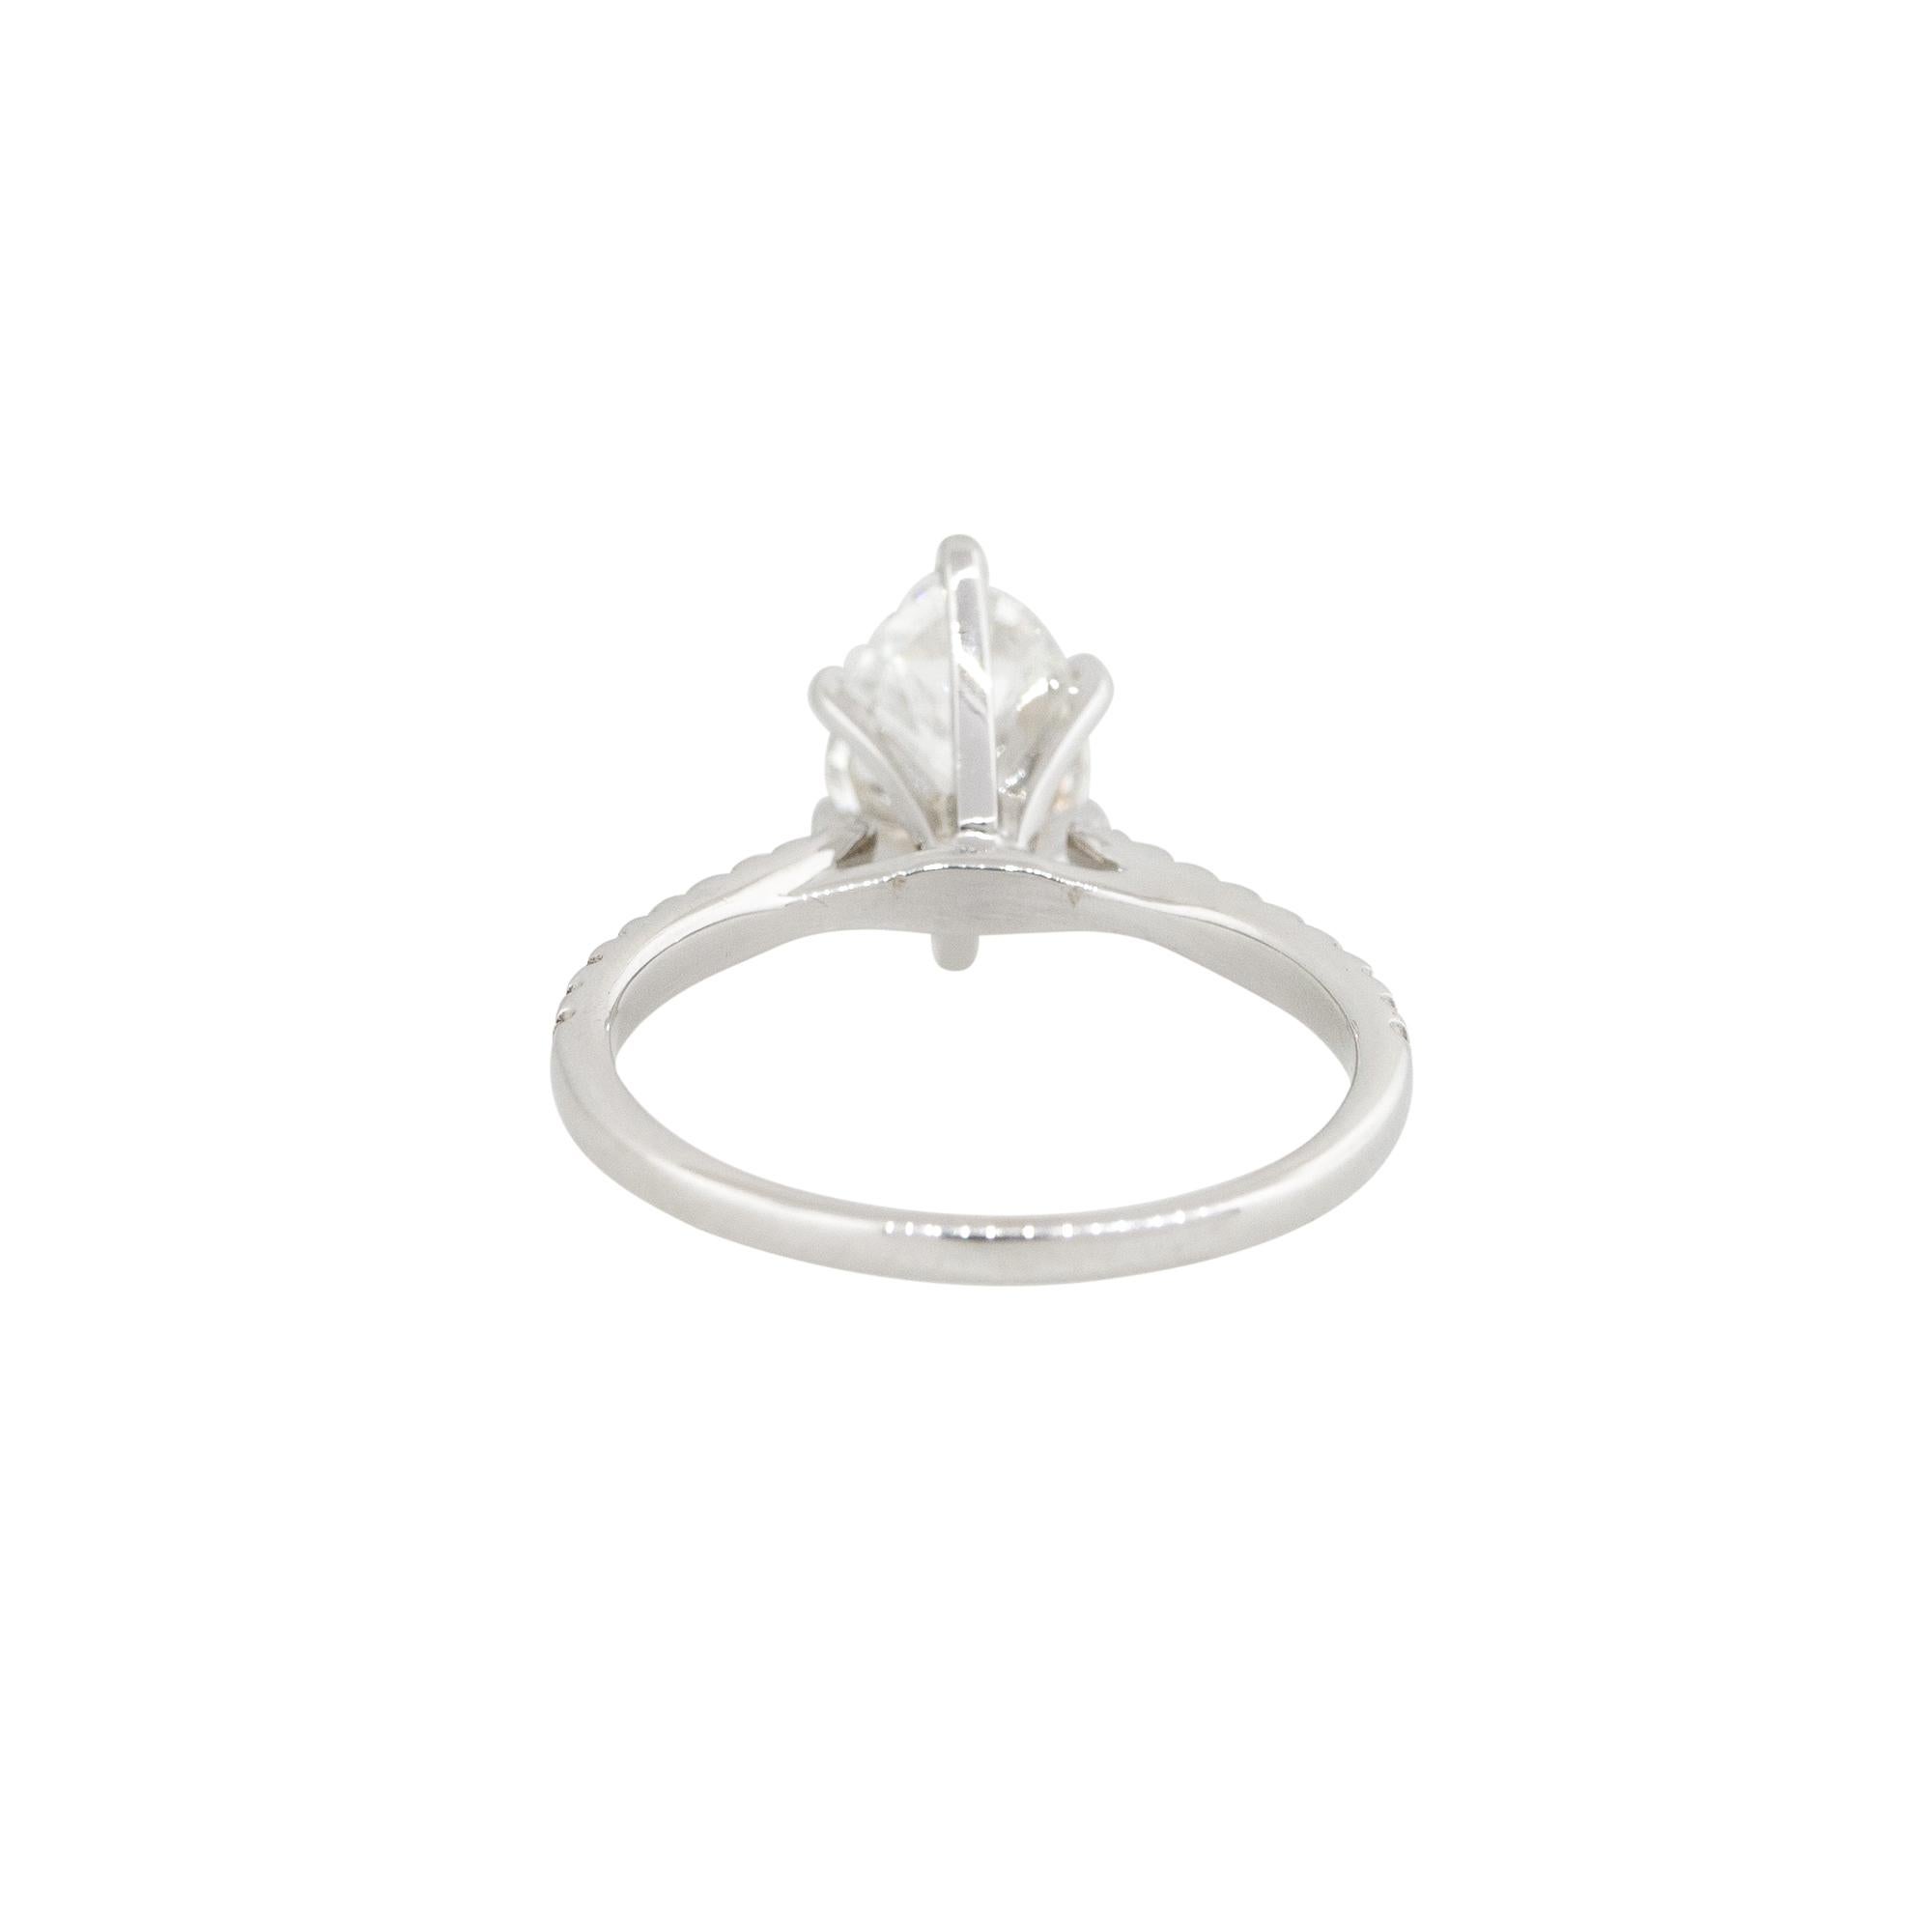 Round Cut GIA Certified 1.67 Carat Marquise Cut Diamond Engagement Ring 14 Karat In Stock For Sale